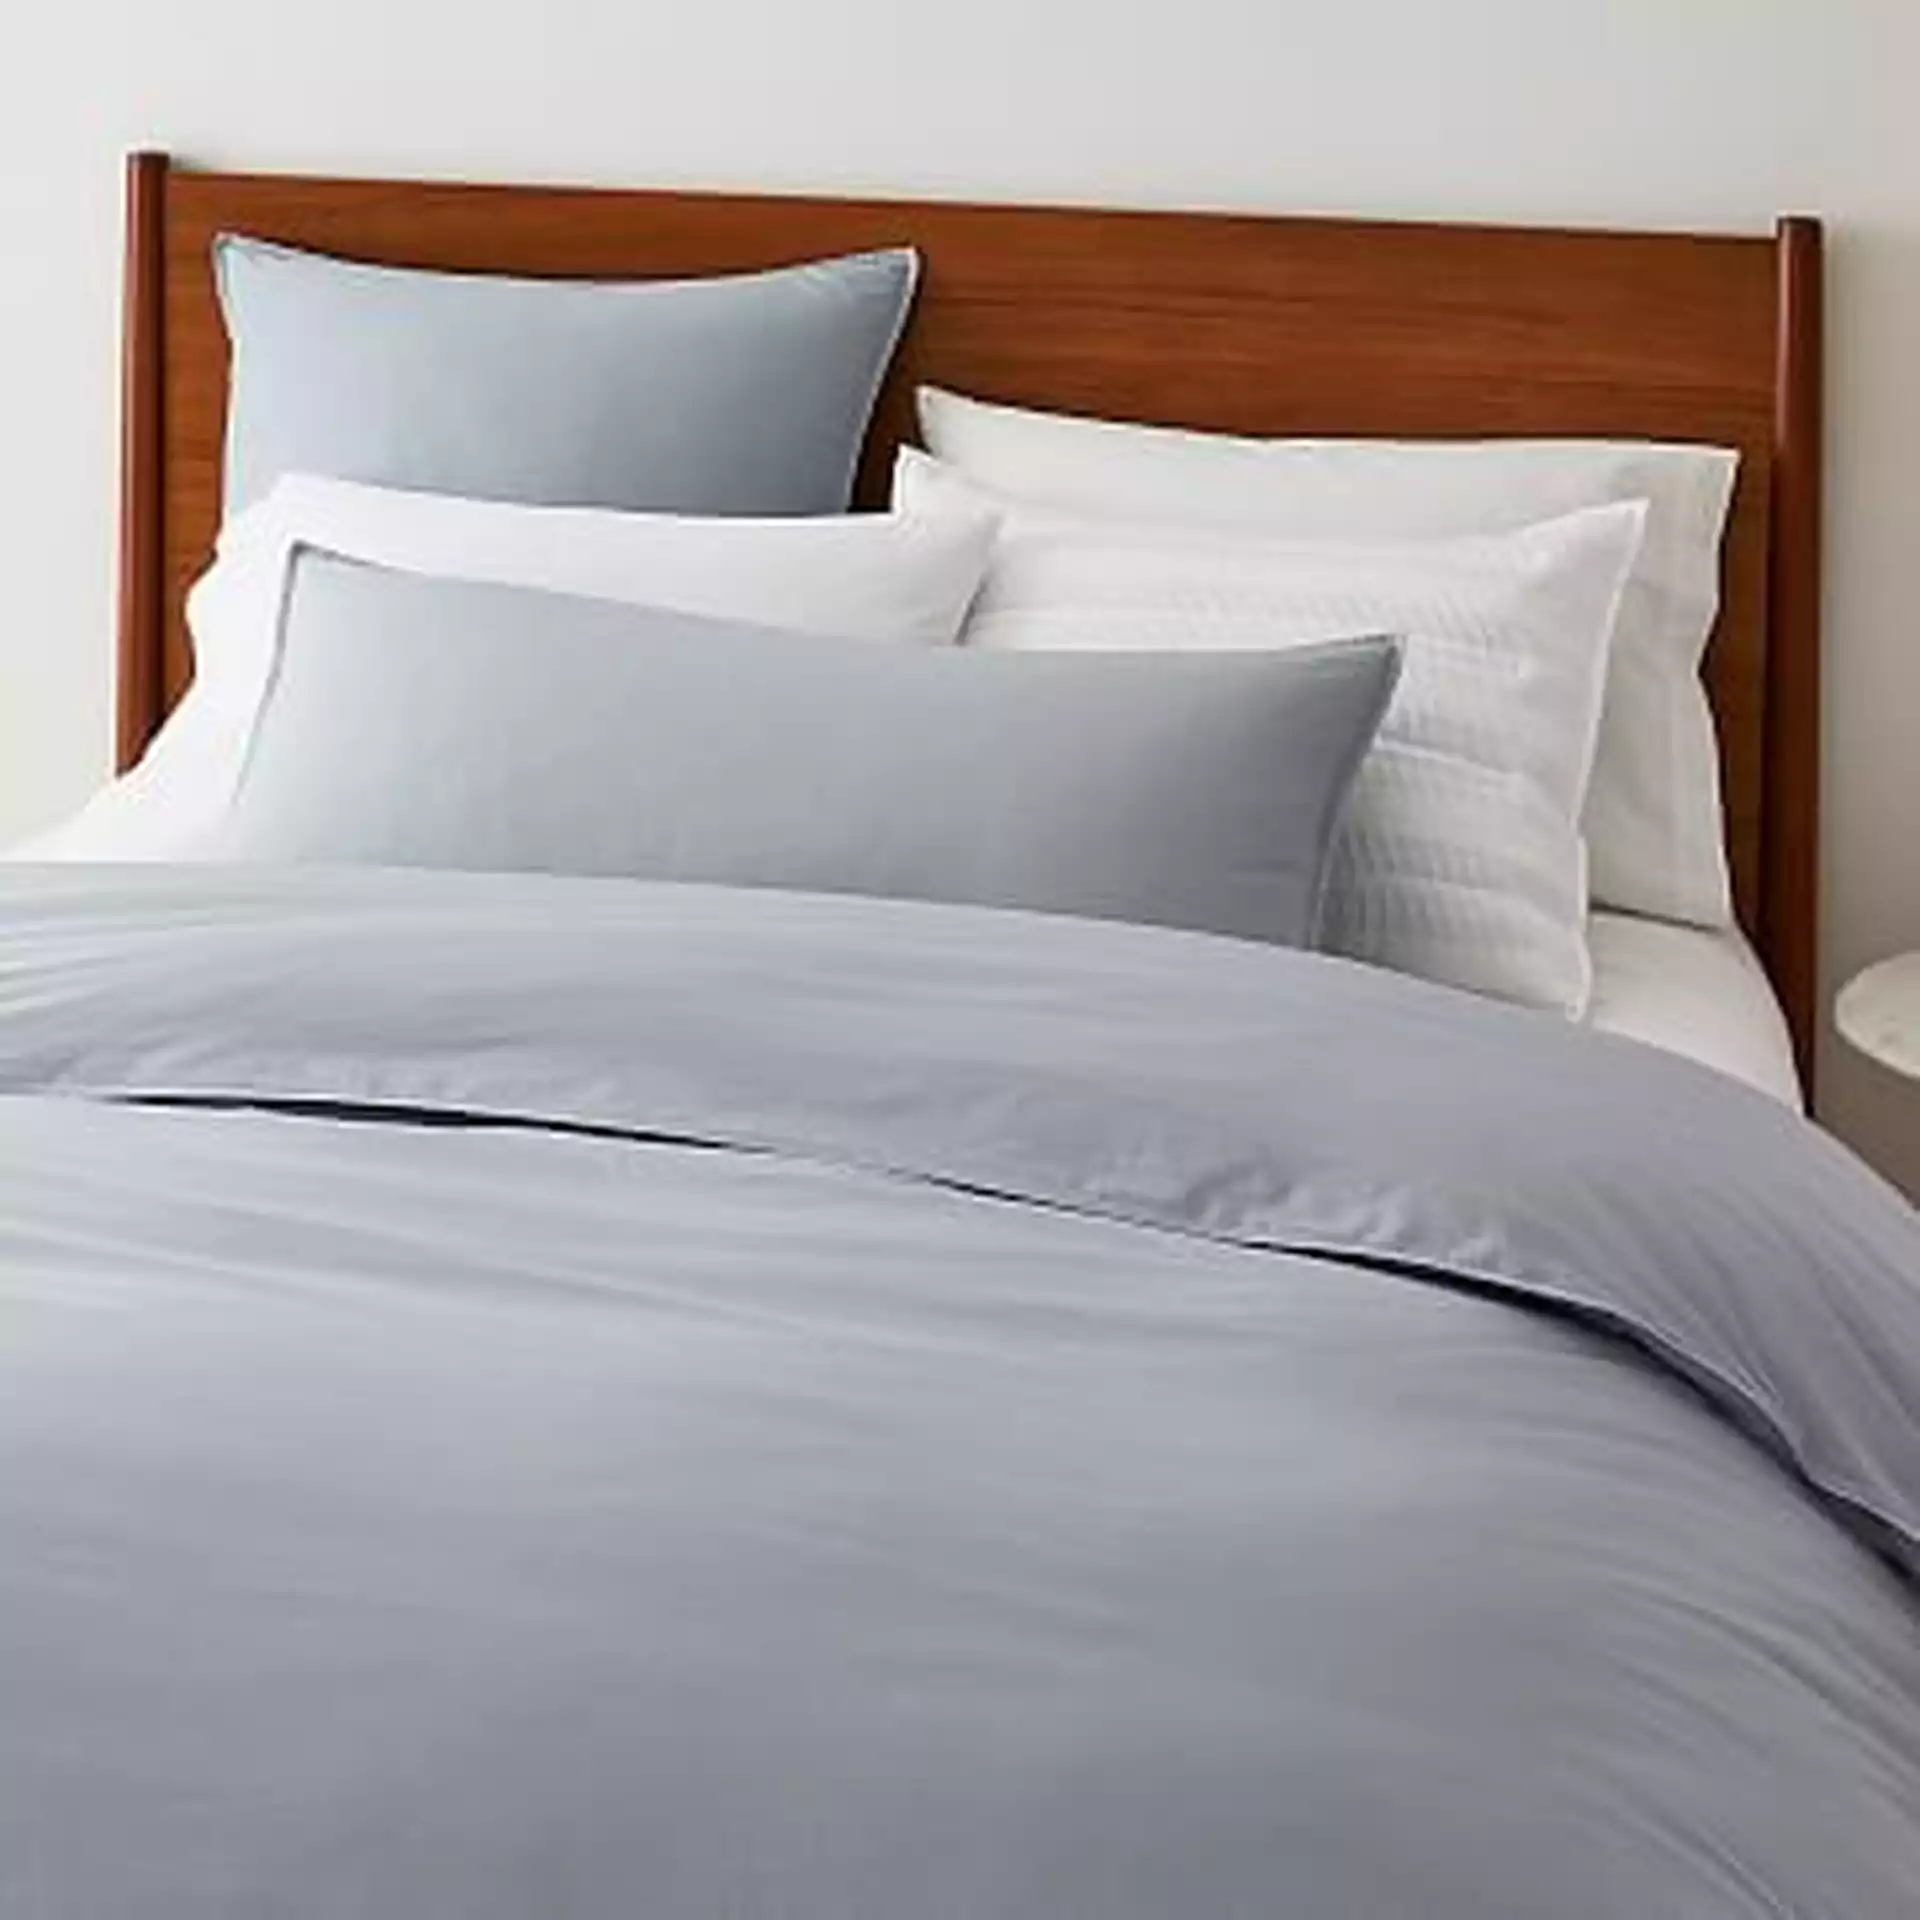 Organic Washed Cotton Duvet, Full/Queen, Pearl Gray